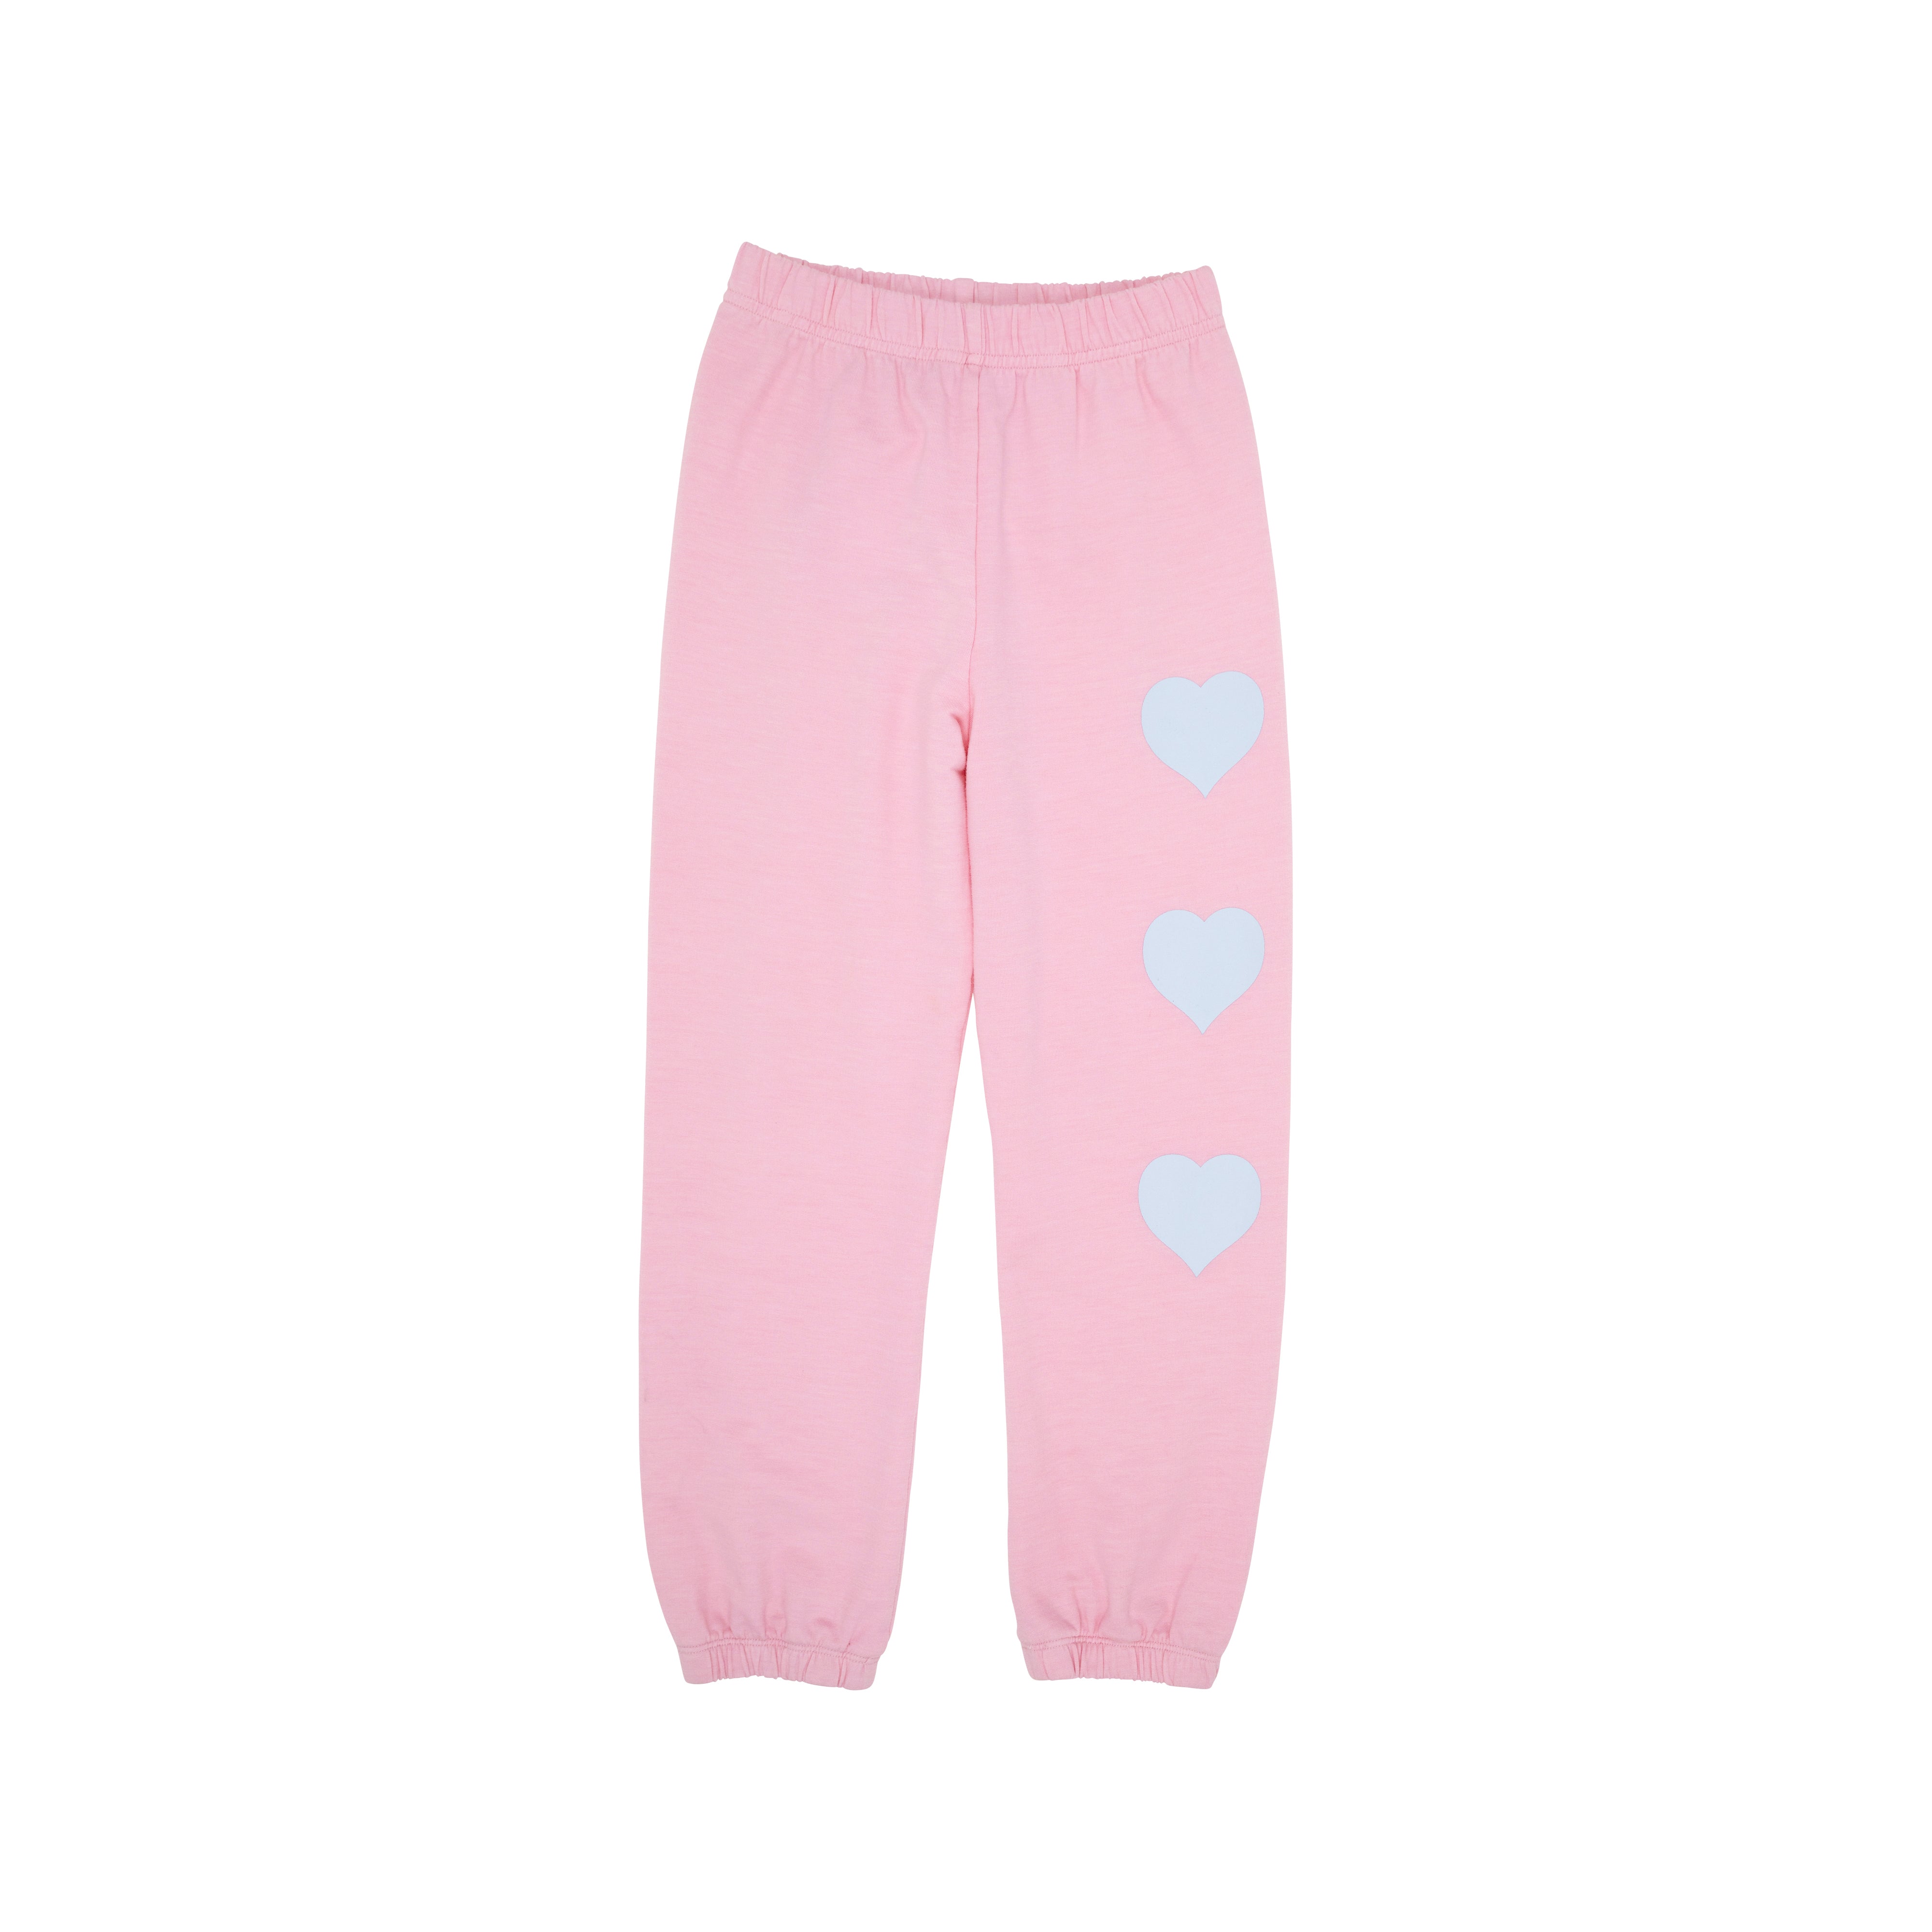 Gates Sweeney Sweatpants - Pier Party Pink with Buckhead Blue Hearts ...